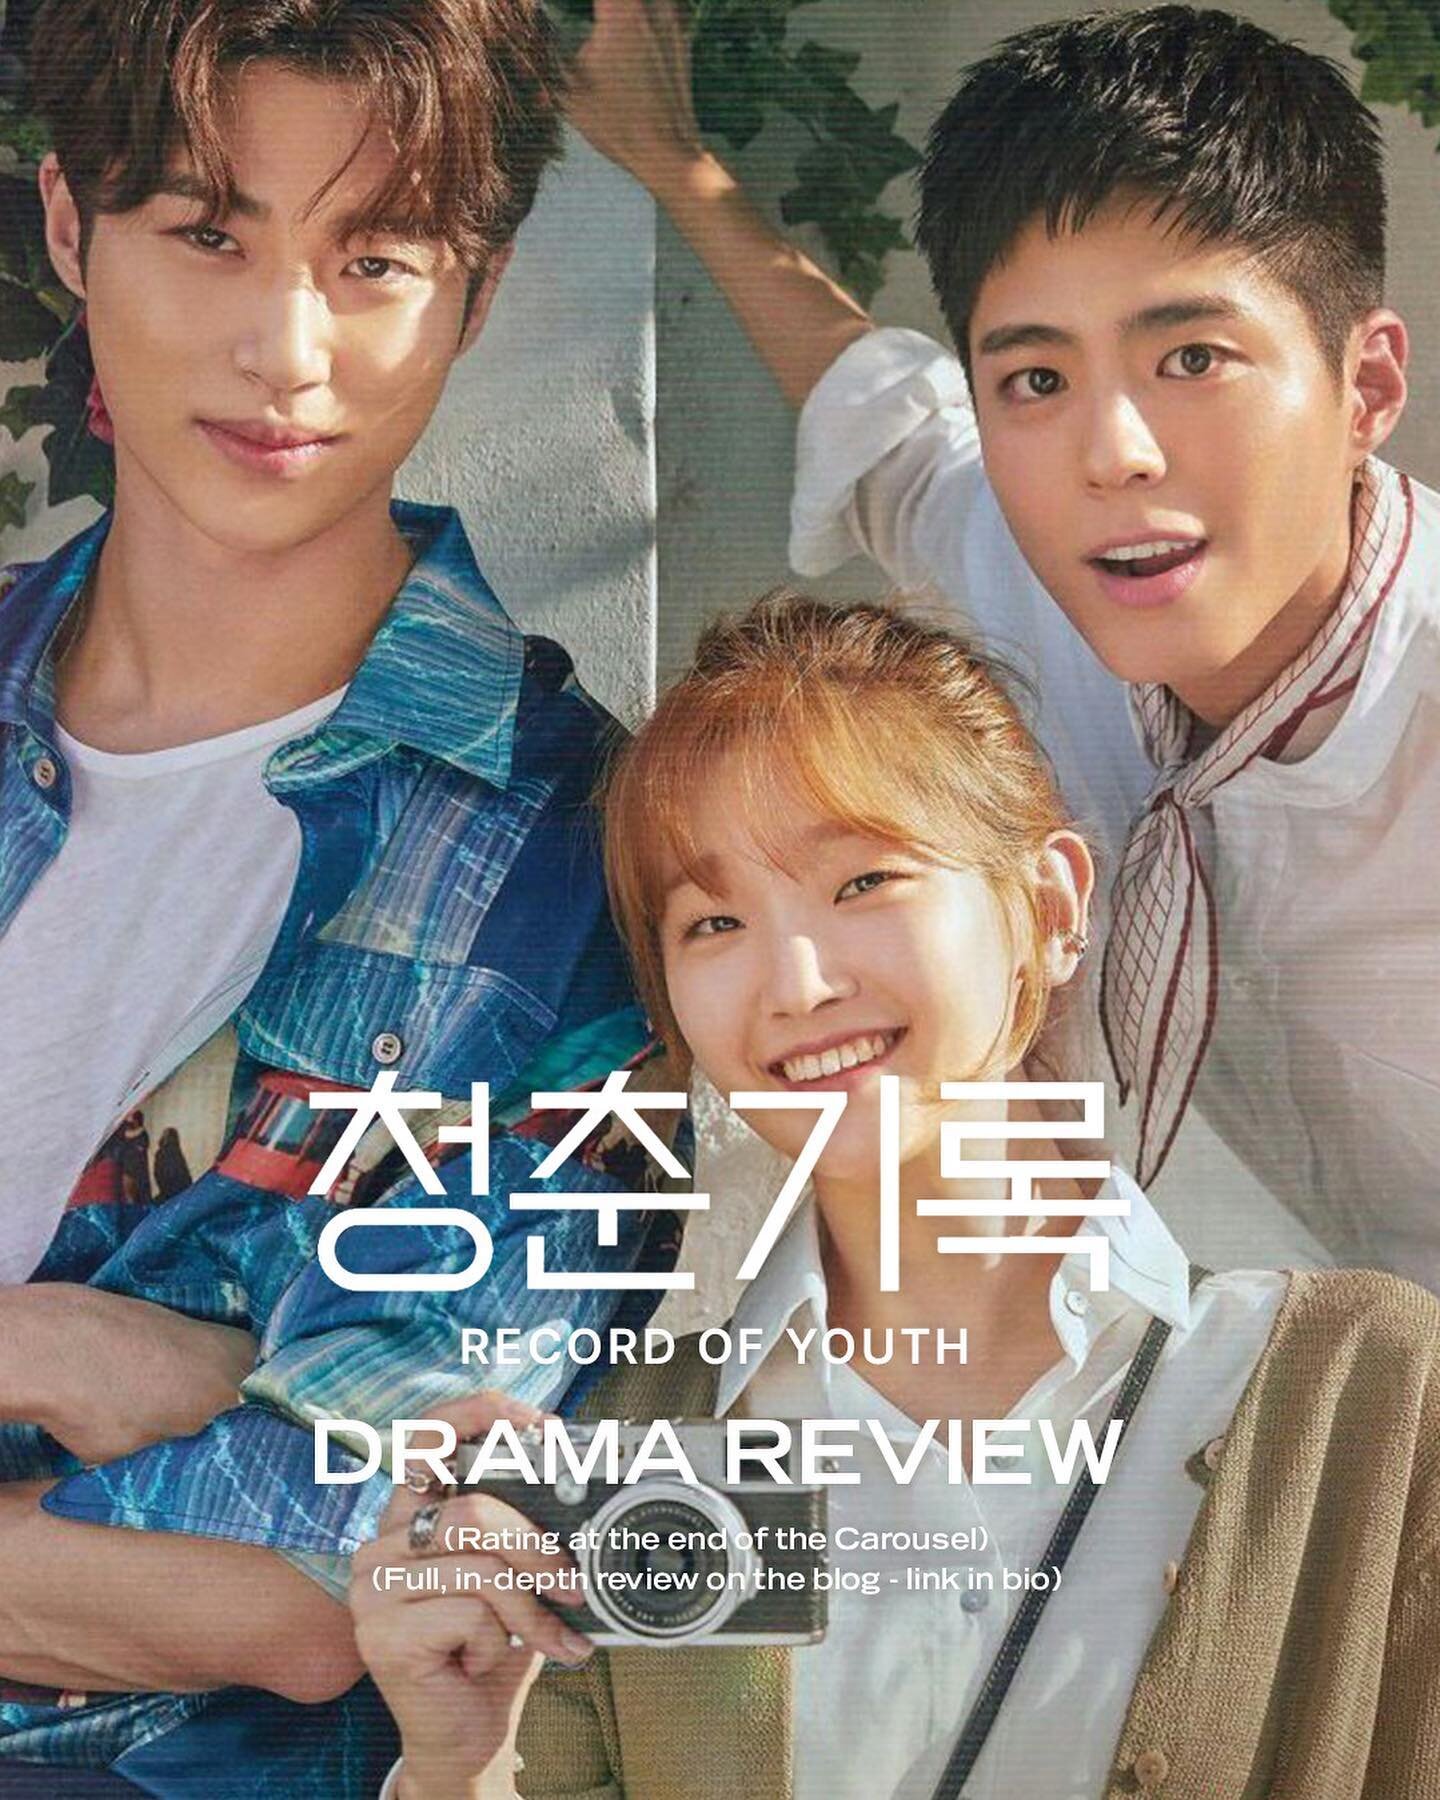 Review for &lsquo;#RecordofYouth&rsquo; is up on the blog! I actually enjoyed this show more than I thought I would! Full in-depth review on the blog - link in bio! #청춘기록 #박보검 #박소담 #변우석 #ParkBoGum #ParkSoDam #ByunWooSeok #kdramas #kdrama #koreandrama